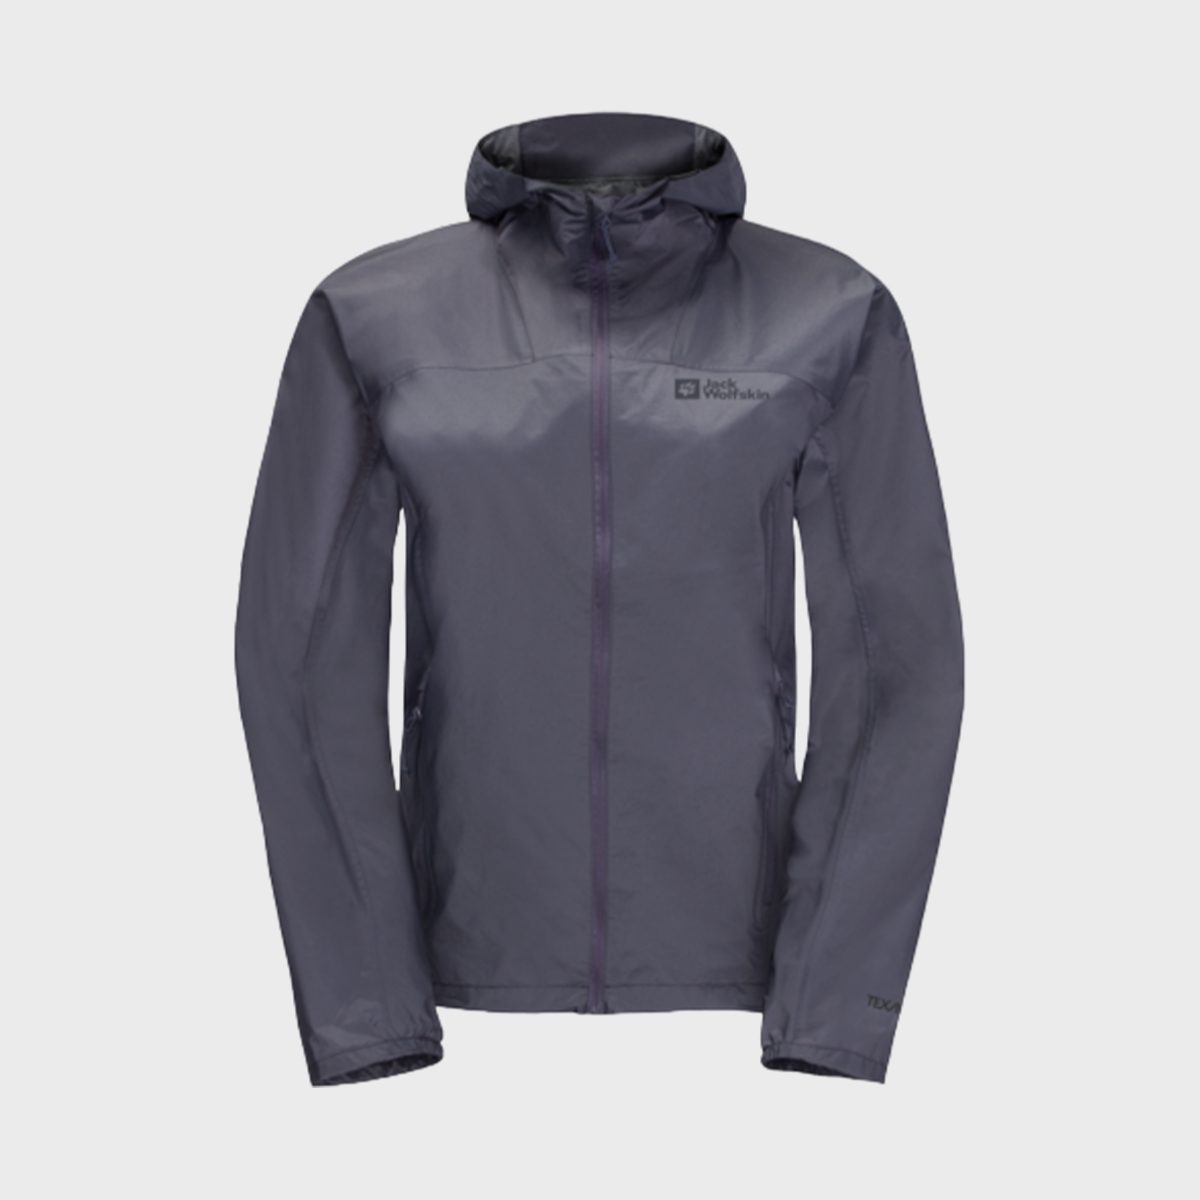 <p>The weather at sea and on land can be unpredictable, so when I consider what to pack for a cruise, I always include a <a href="https://www.rd.com/list/best-rain-jackets-for-women/">lightweight rain jacket</a> regardless of the forecast. This women's <a href="https://us.jackwolfskin.com/jw/womens/jackets/waterproof-and-rain/PRELIGHT-2-5L-JKT-W/p/1115921_6179_" rel="noopener">Prelight 2.5L jacket</a> offers 100% waterproof and windproof weather protection, yet it's extremely breathable. I love how it folds down into a packable garment. If the weather is looking even remotely iffy, I'll shove it into my travel purse when heading out on an excursion.</p> <p class="listicle-page__cta-button-shop"><a class="shop-btn" href="https://us.jackwolfskin.com/jw/womens/jackets/waterproof-and-rain/PRELIGHT-2-5L-JKT-W/p/1115921_6179_">Shop Now</a></p>